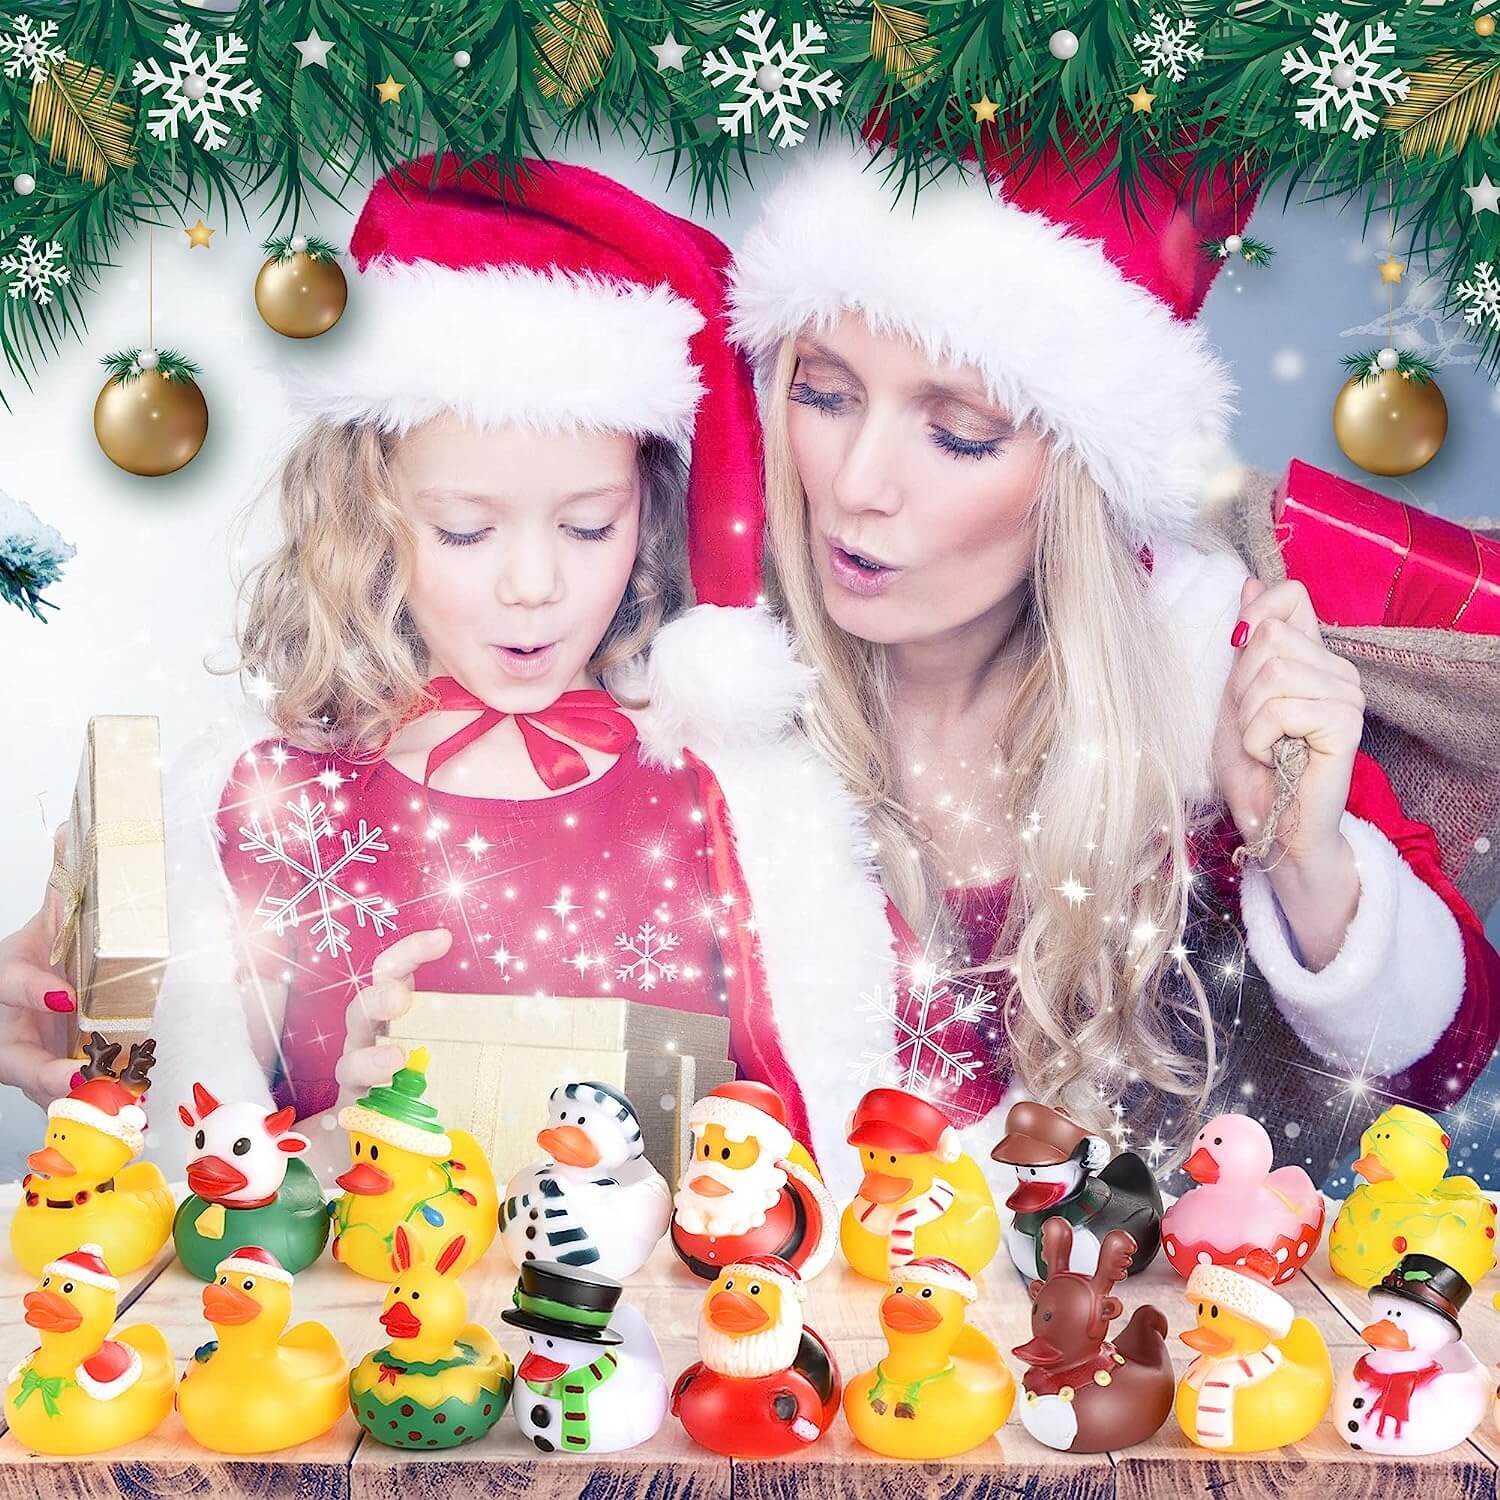 Quackin' Up the Holidays with Fun Christmas Rubber Ducks!